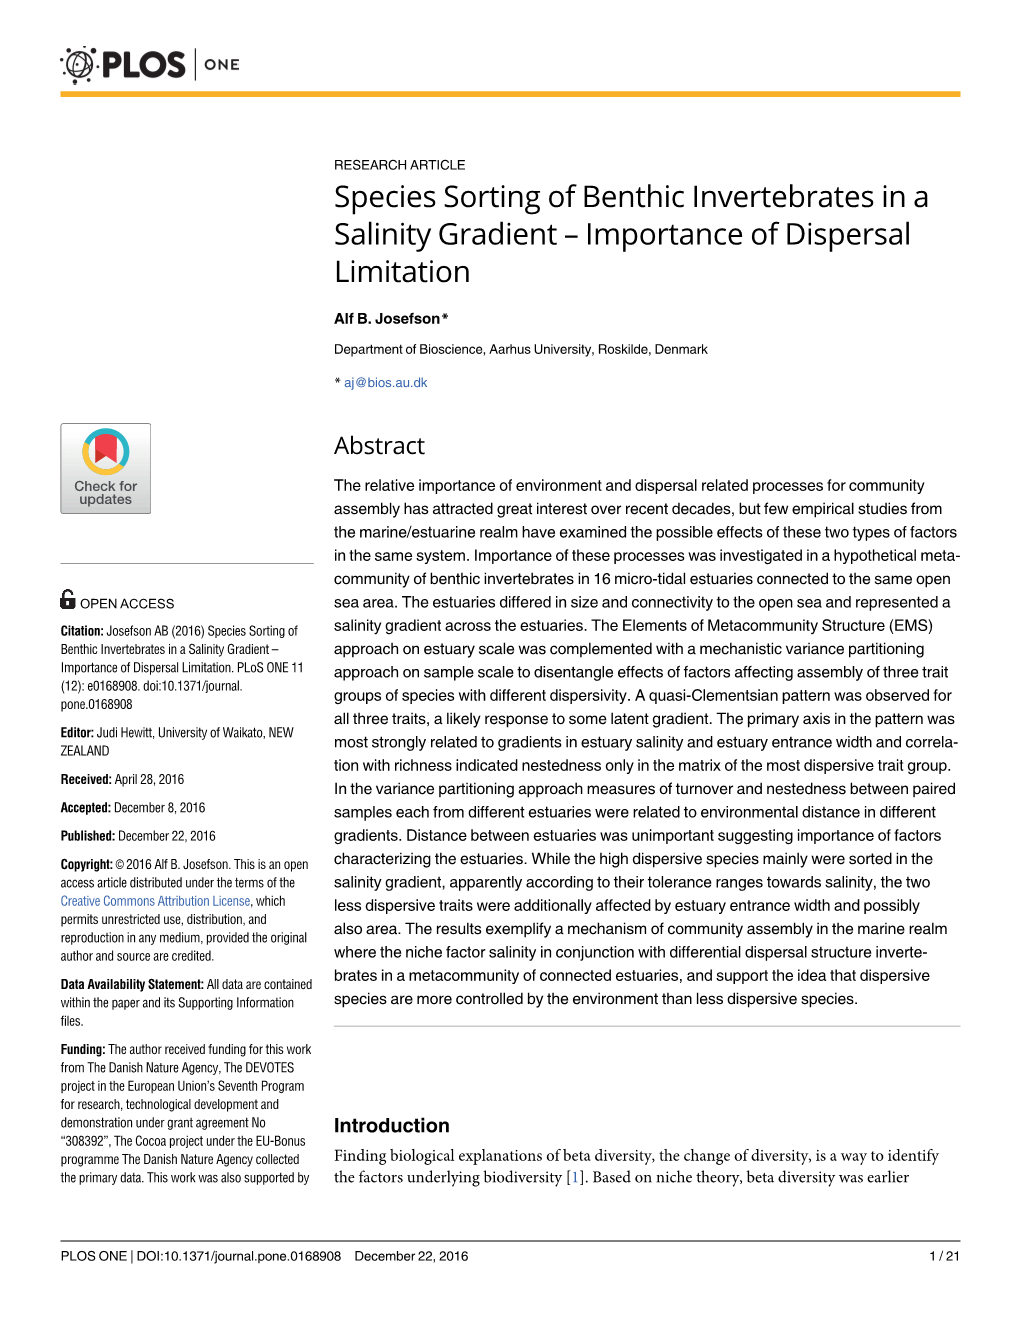 Species Sorting of Benthic Invertebrates in a Salinity Gradient – Importance of Dispersal Limitation